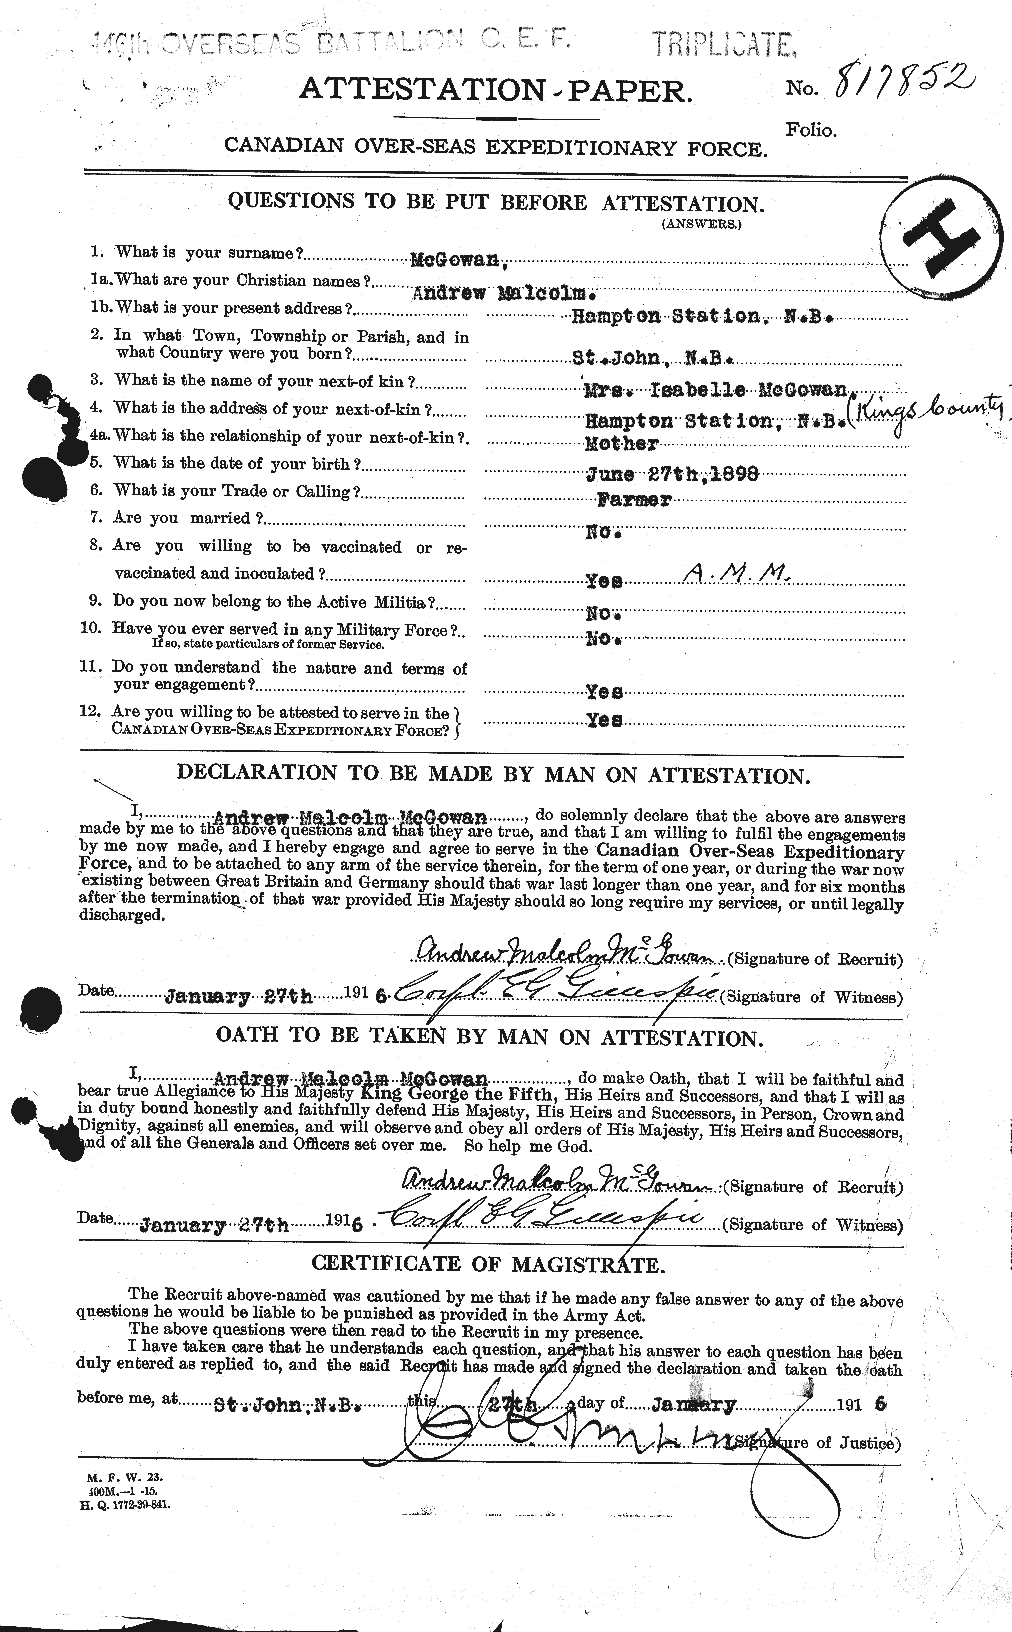 Personnel Records of the First World War - CEF 522540a